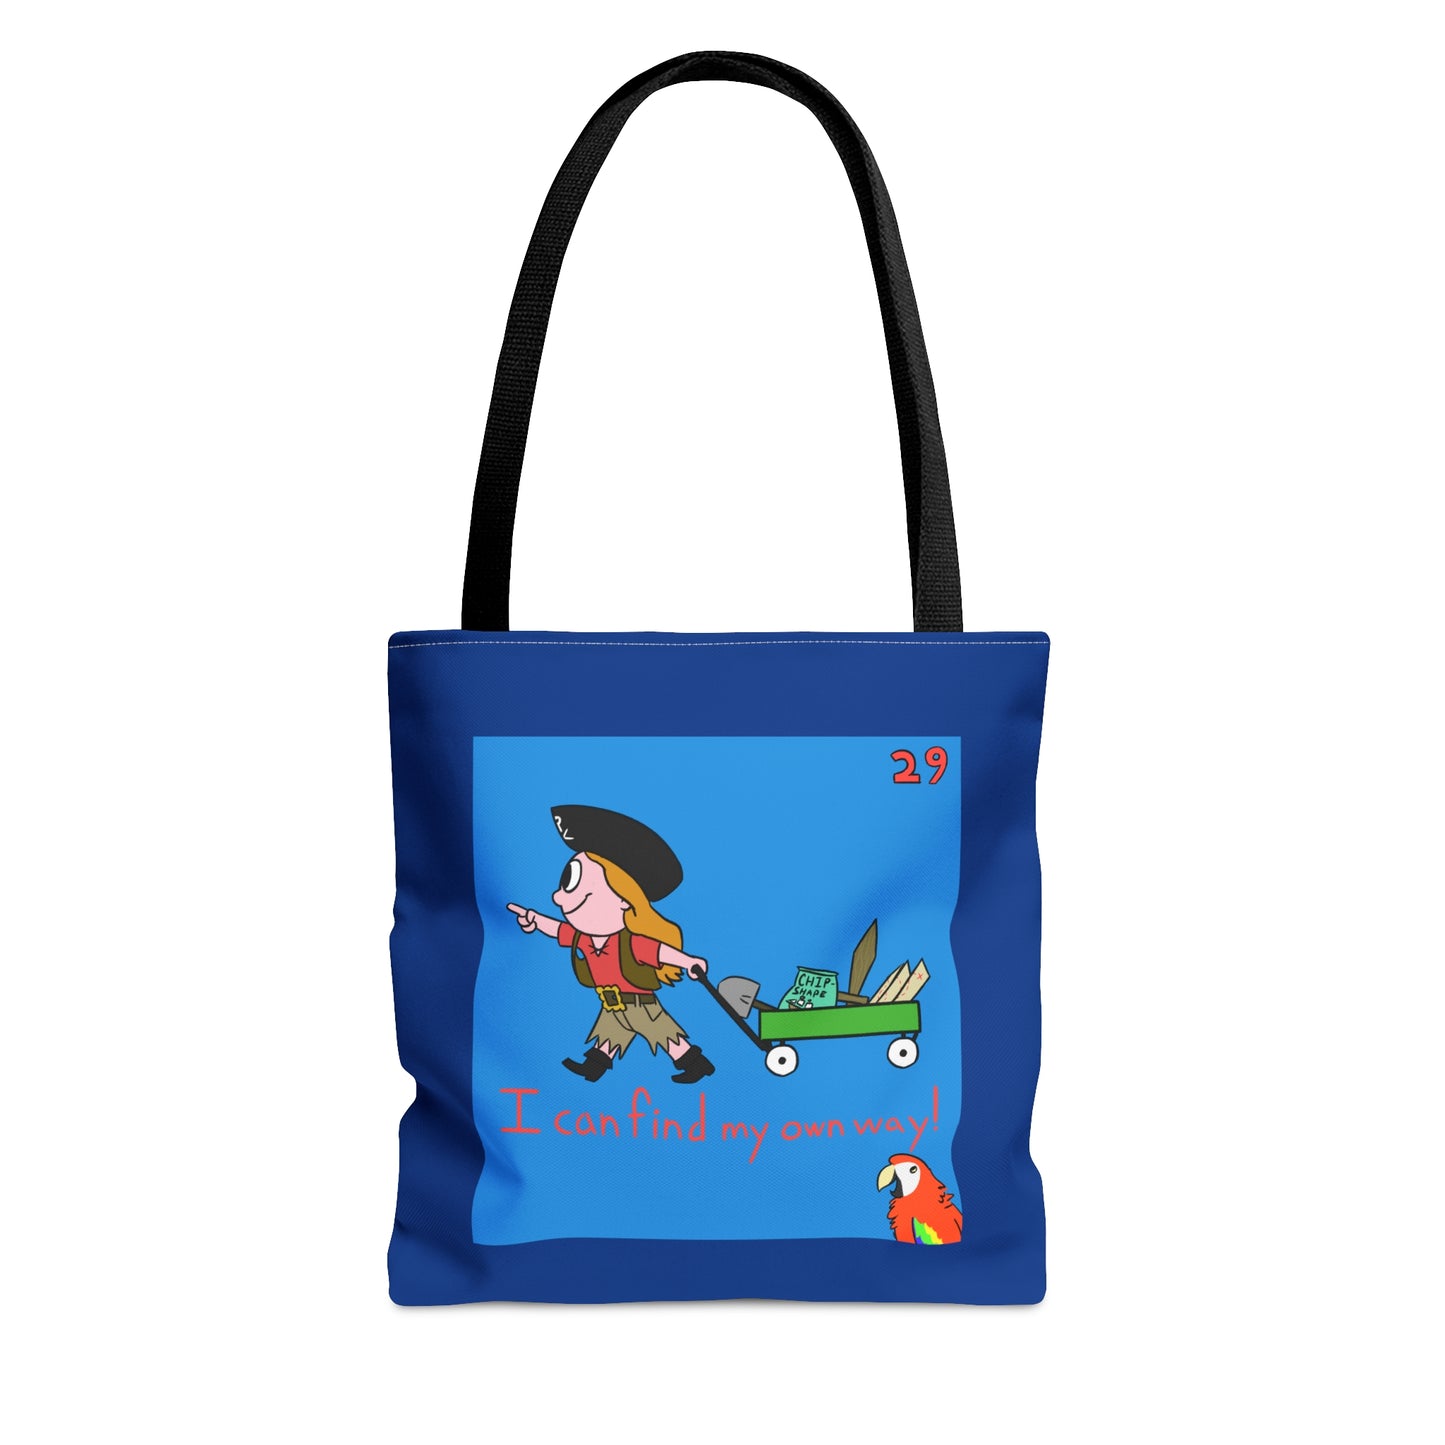 ITBOM I Can FIND My Own Way - Pirate BOSS Tote Bag